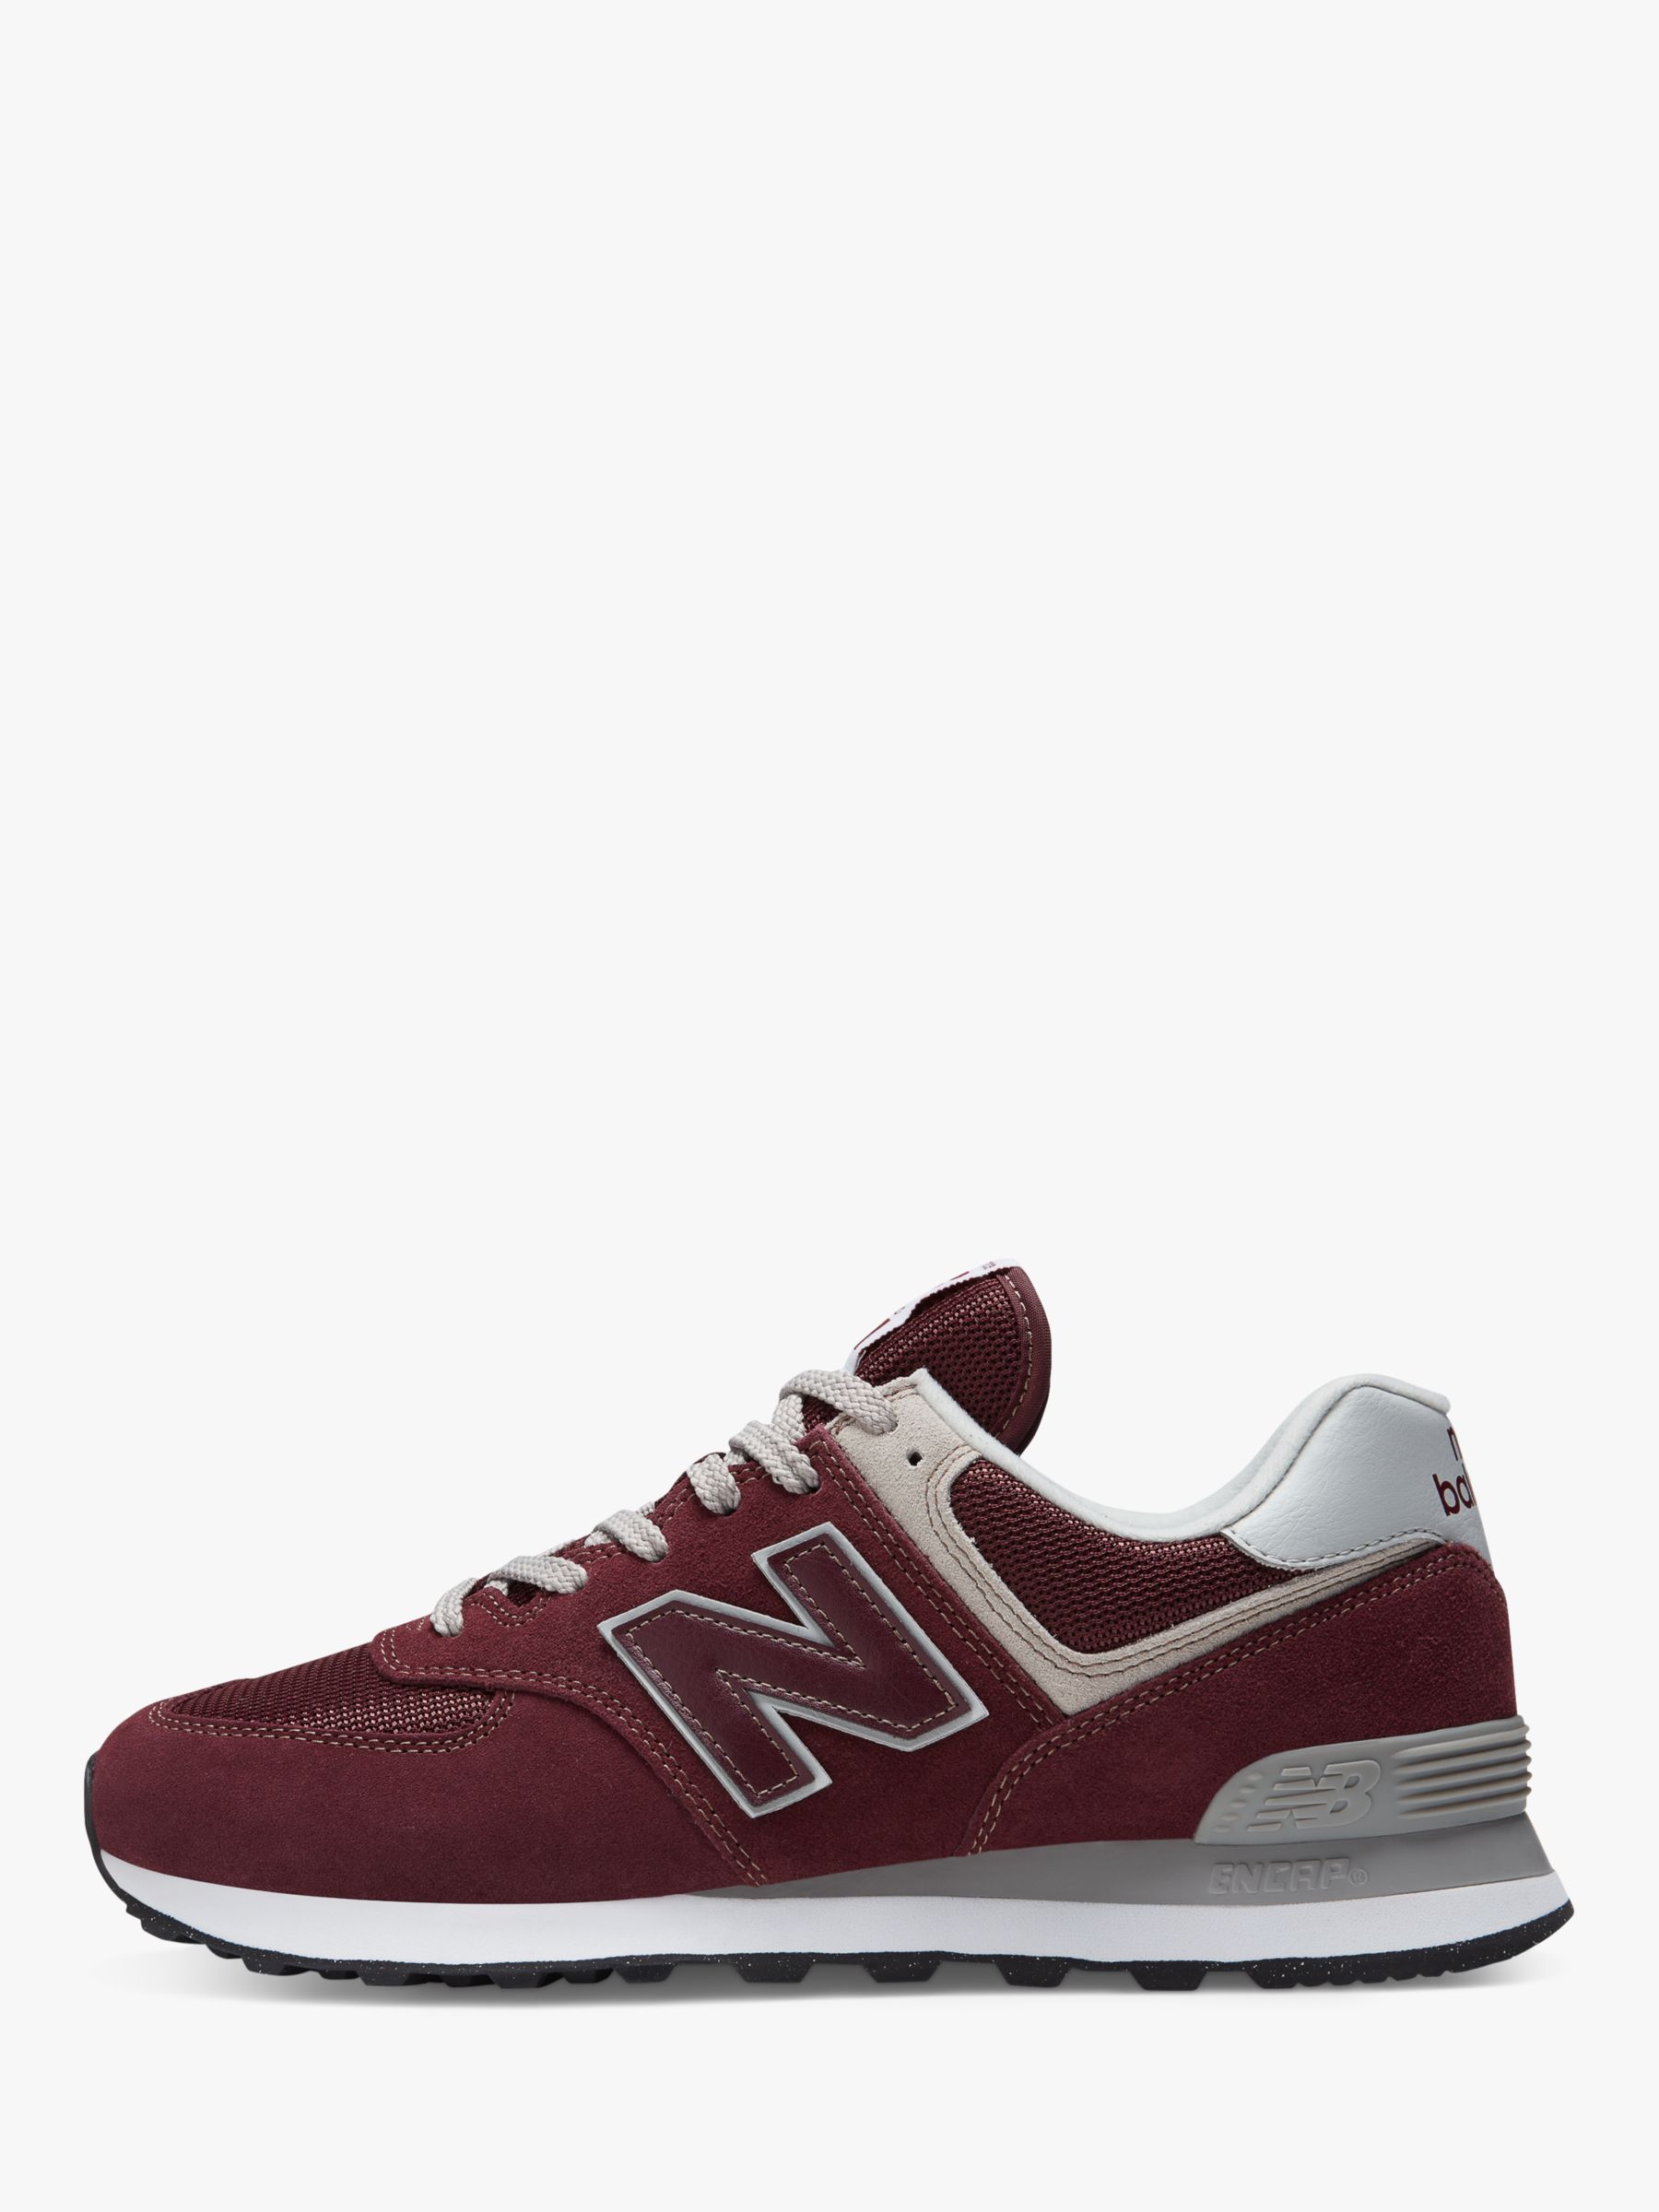 New Balance 574 Suede Trainers, Red, 7